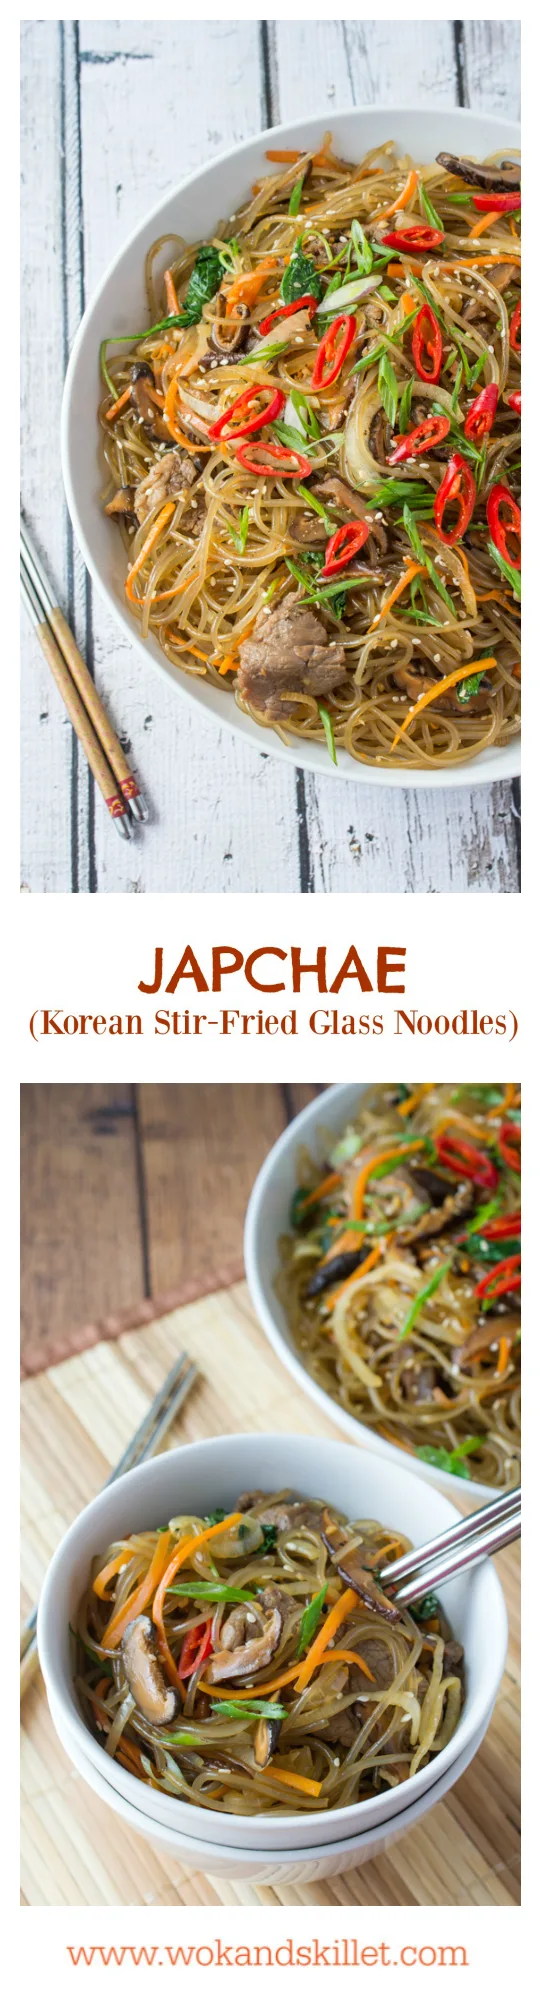 Japchae is a classic Korean dish that can be served as a side, main dish, or over rice. Stir-fried glass noodles with sliced beef, julienned carrots, vegetables and mushrooms, tossed in a sweet soy sauce dressing. 